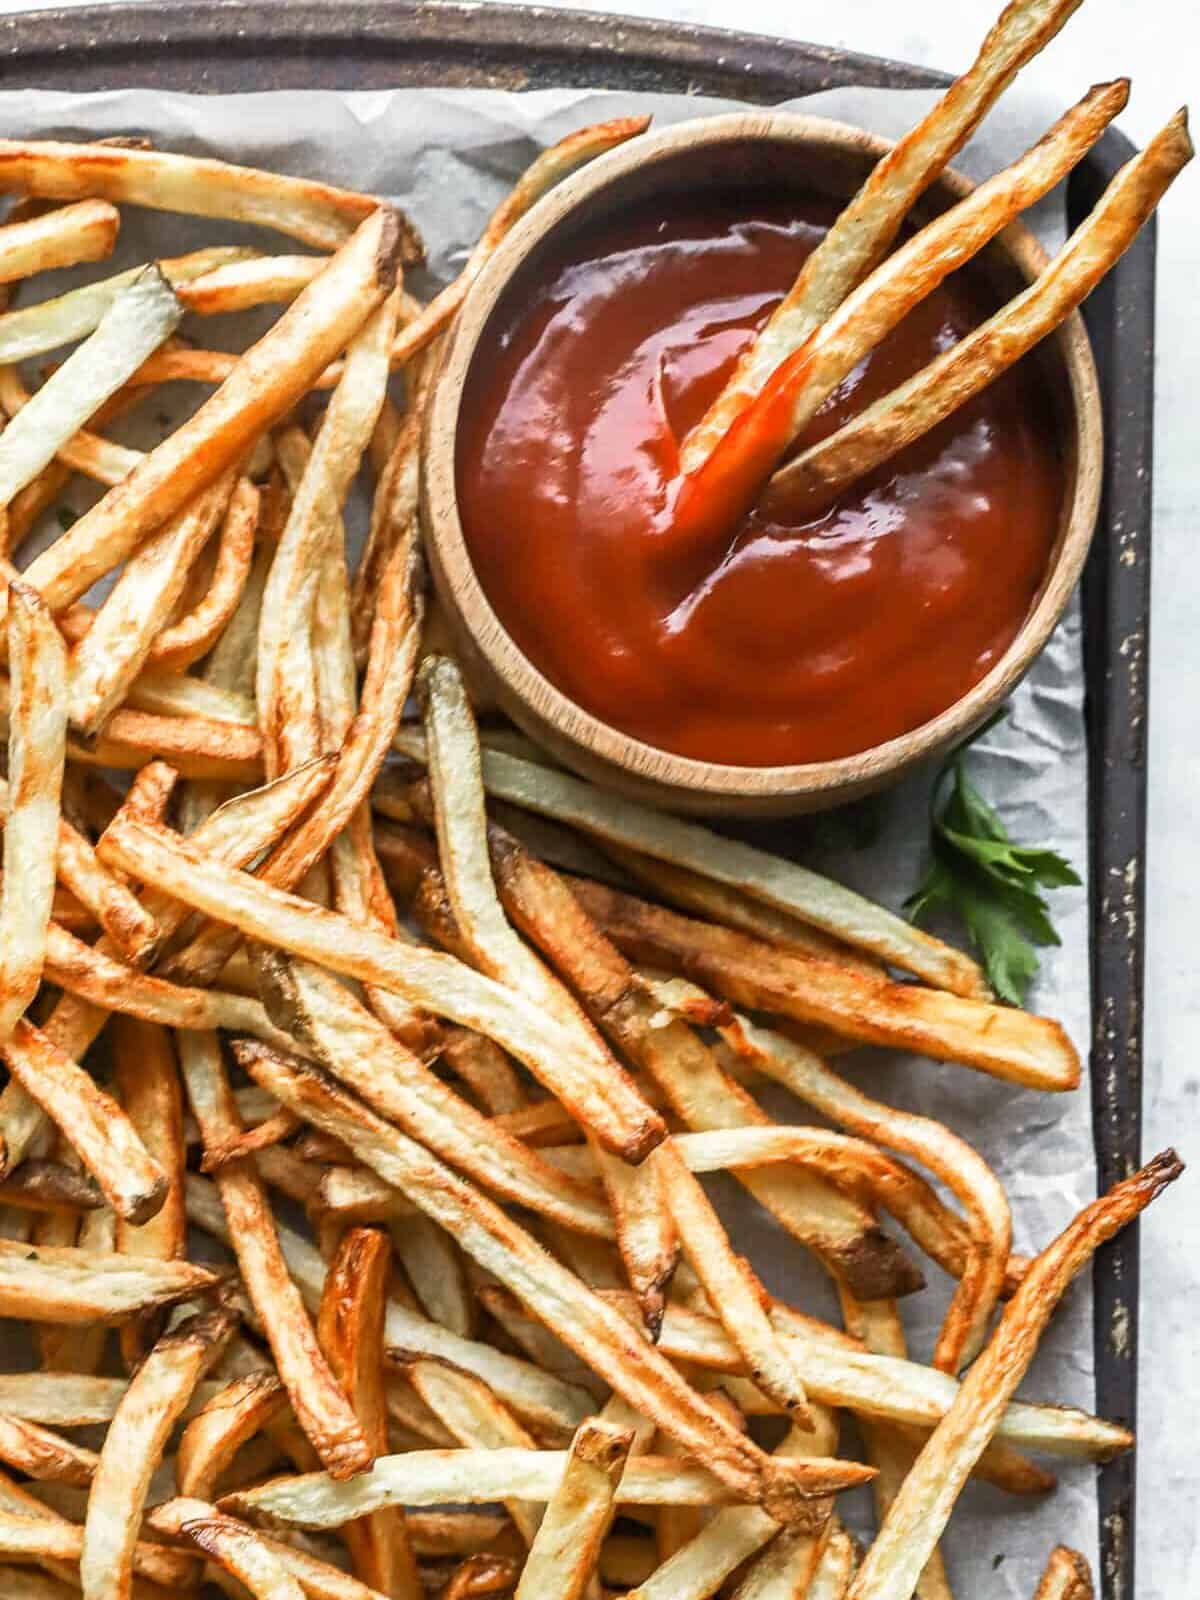 Air Fryer French Fries Recipe –